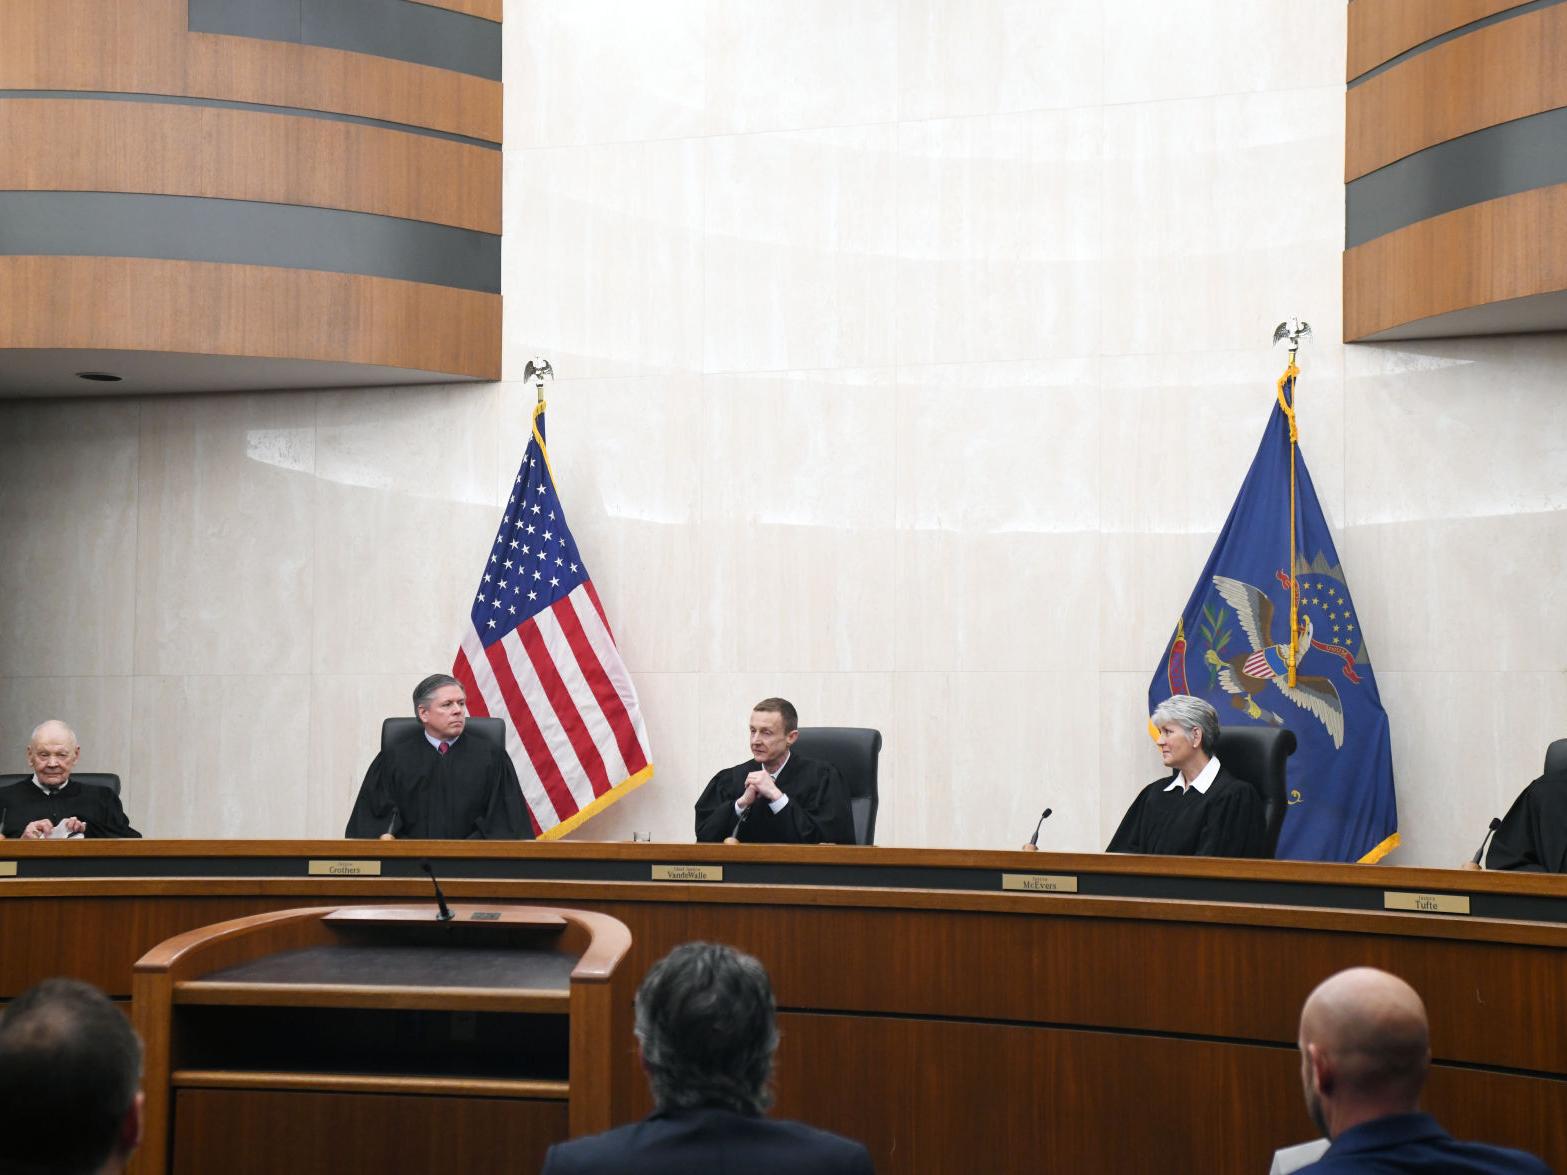 ND Supreme Court Resuming In-Person Oral Arguments In June